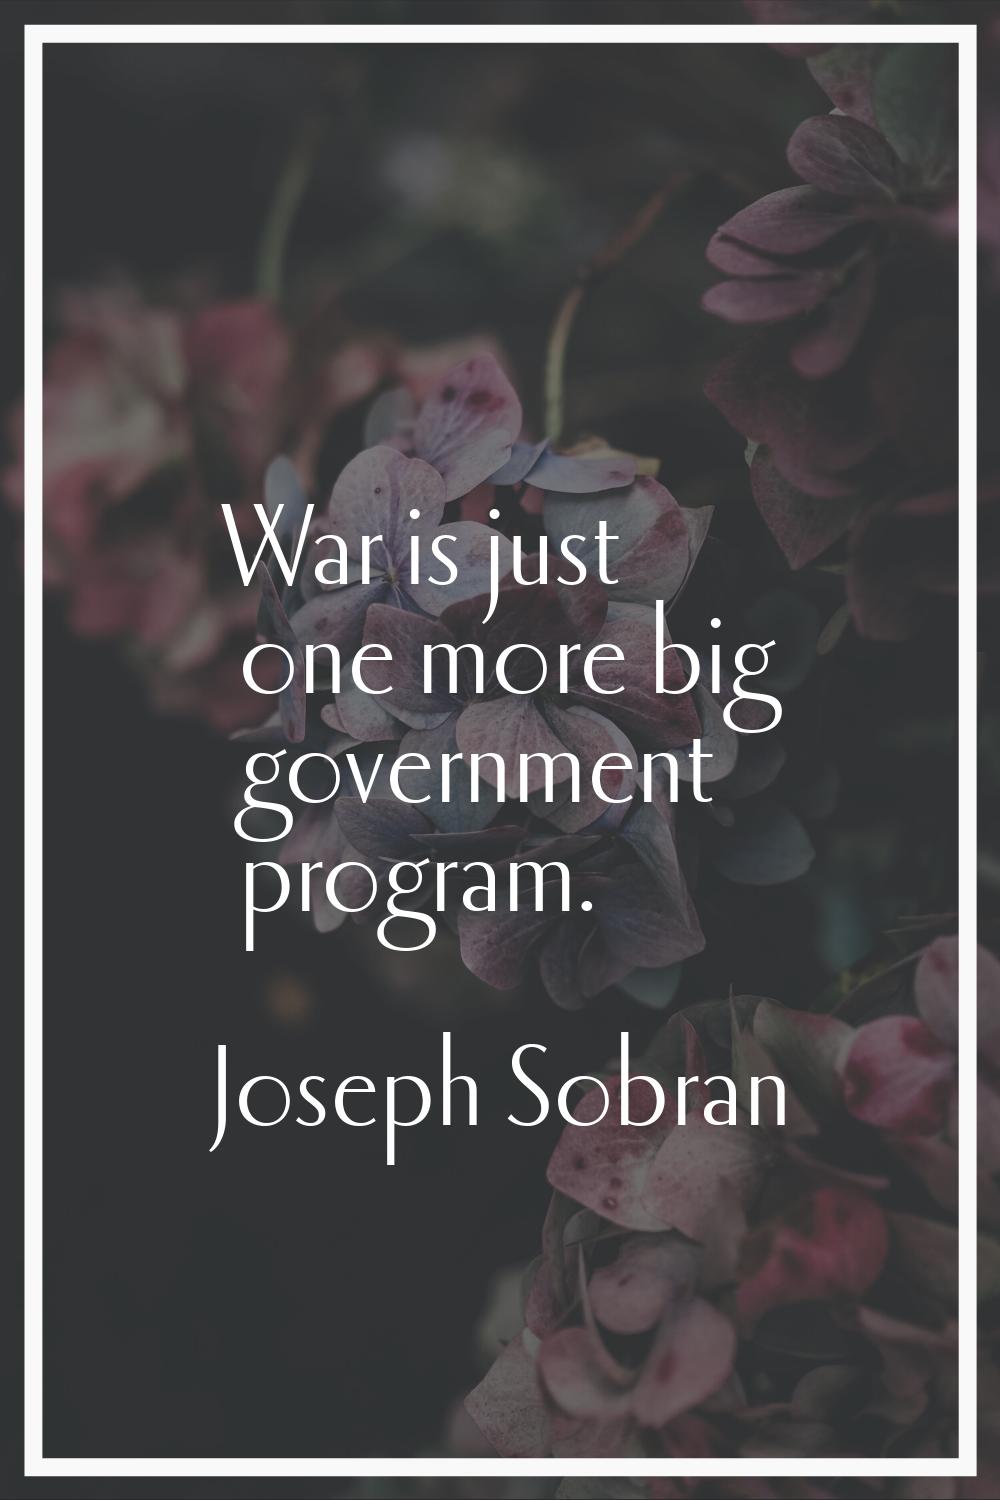 War is just one more big government program.